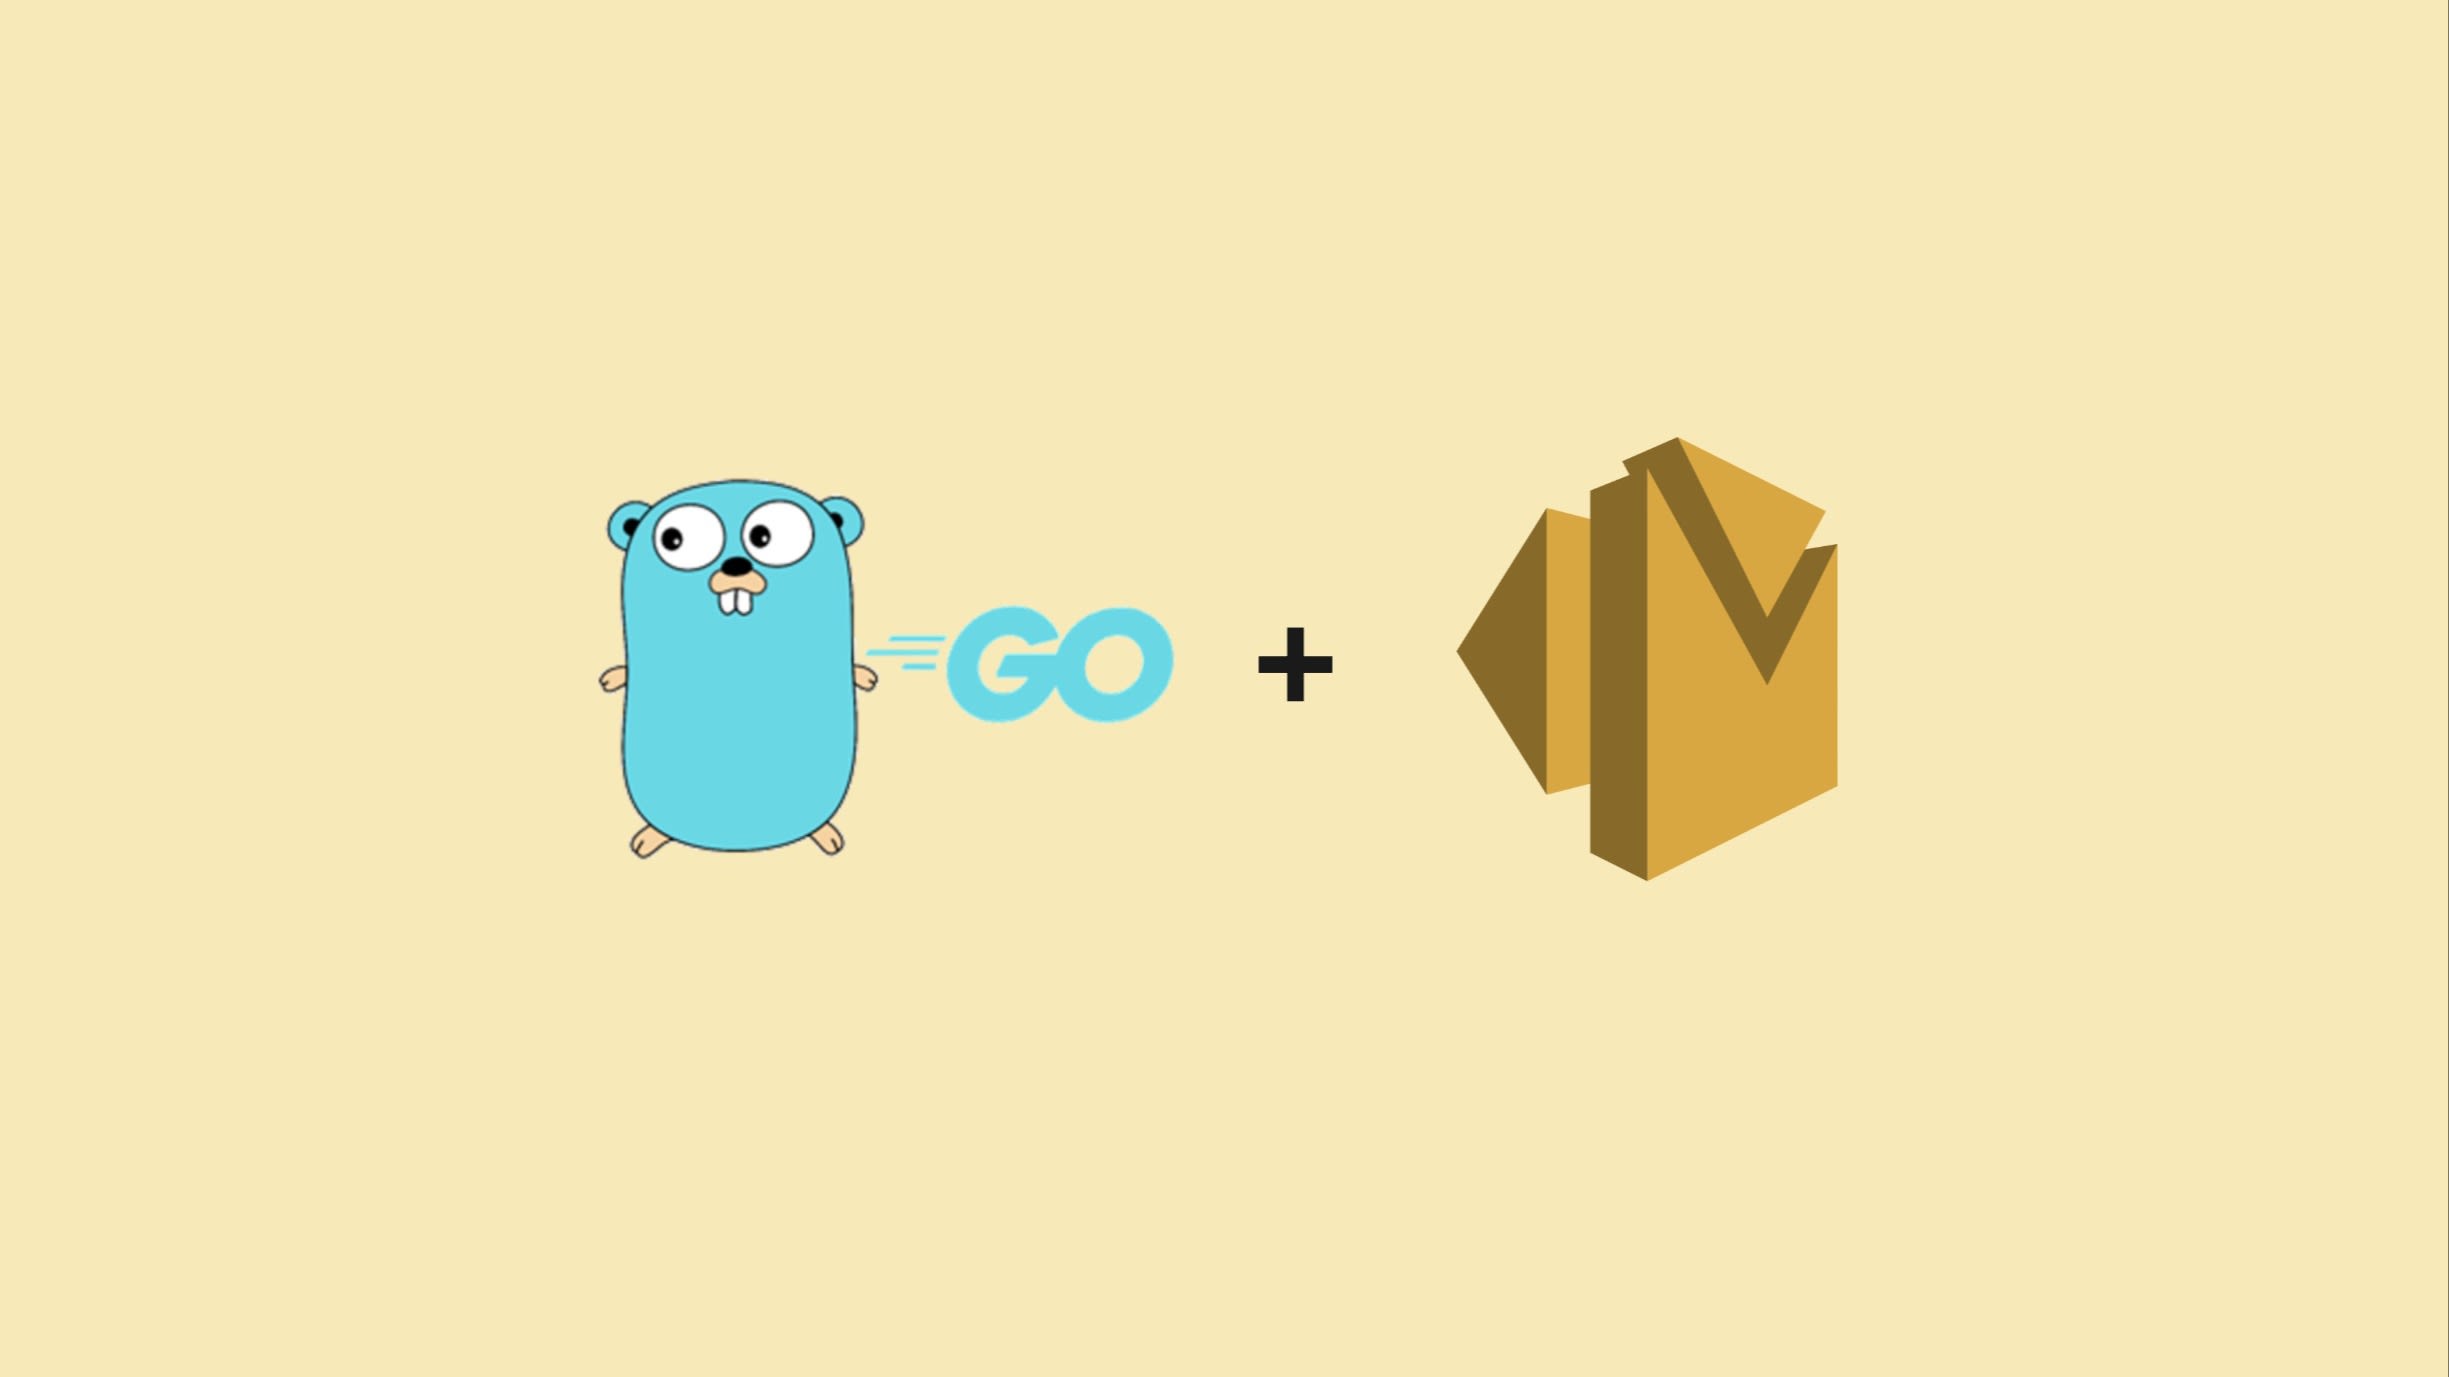 With Go and AWS SES you can efficiently send transactional emails to your clients